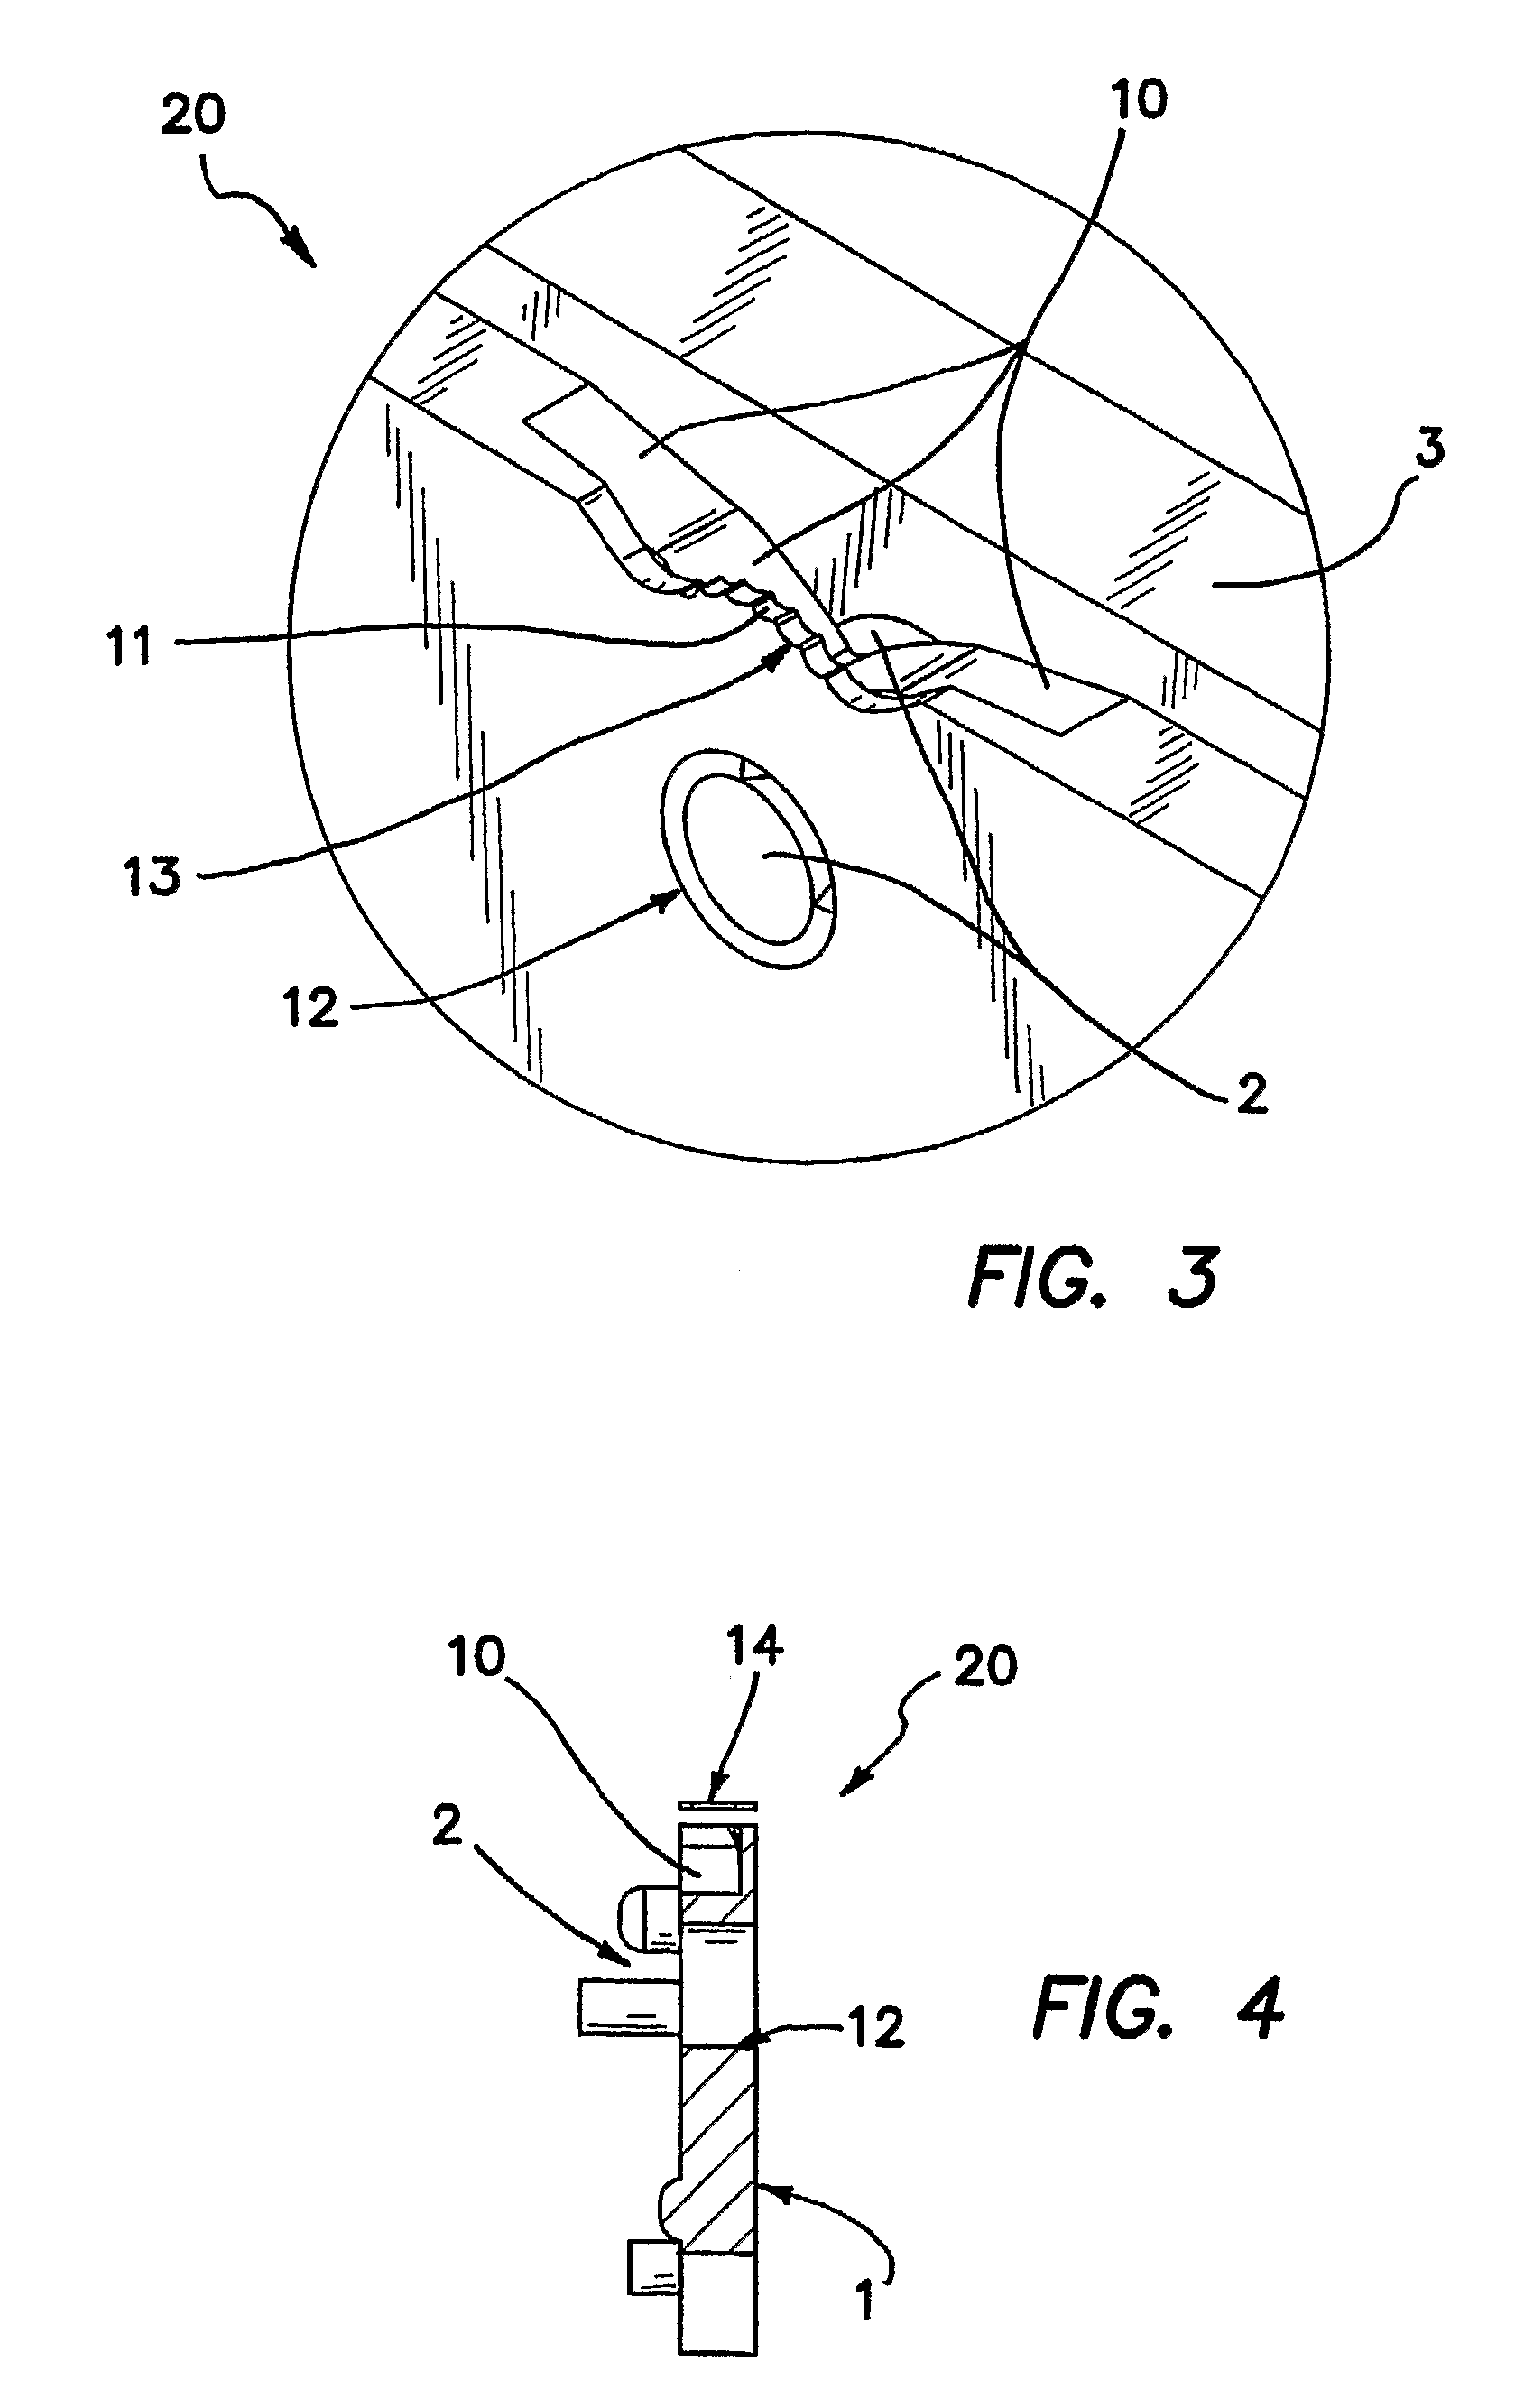 Apparatus And Method Of Using A Led Light Source To Generate An Efficent, Narrow, High-Aspect Ratio Light Pattern